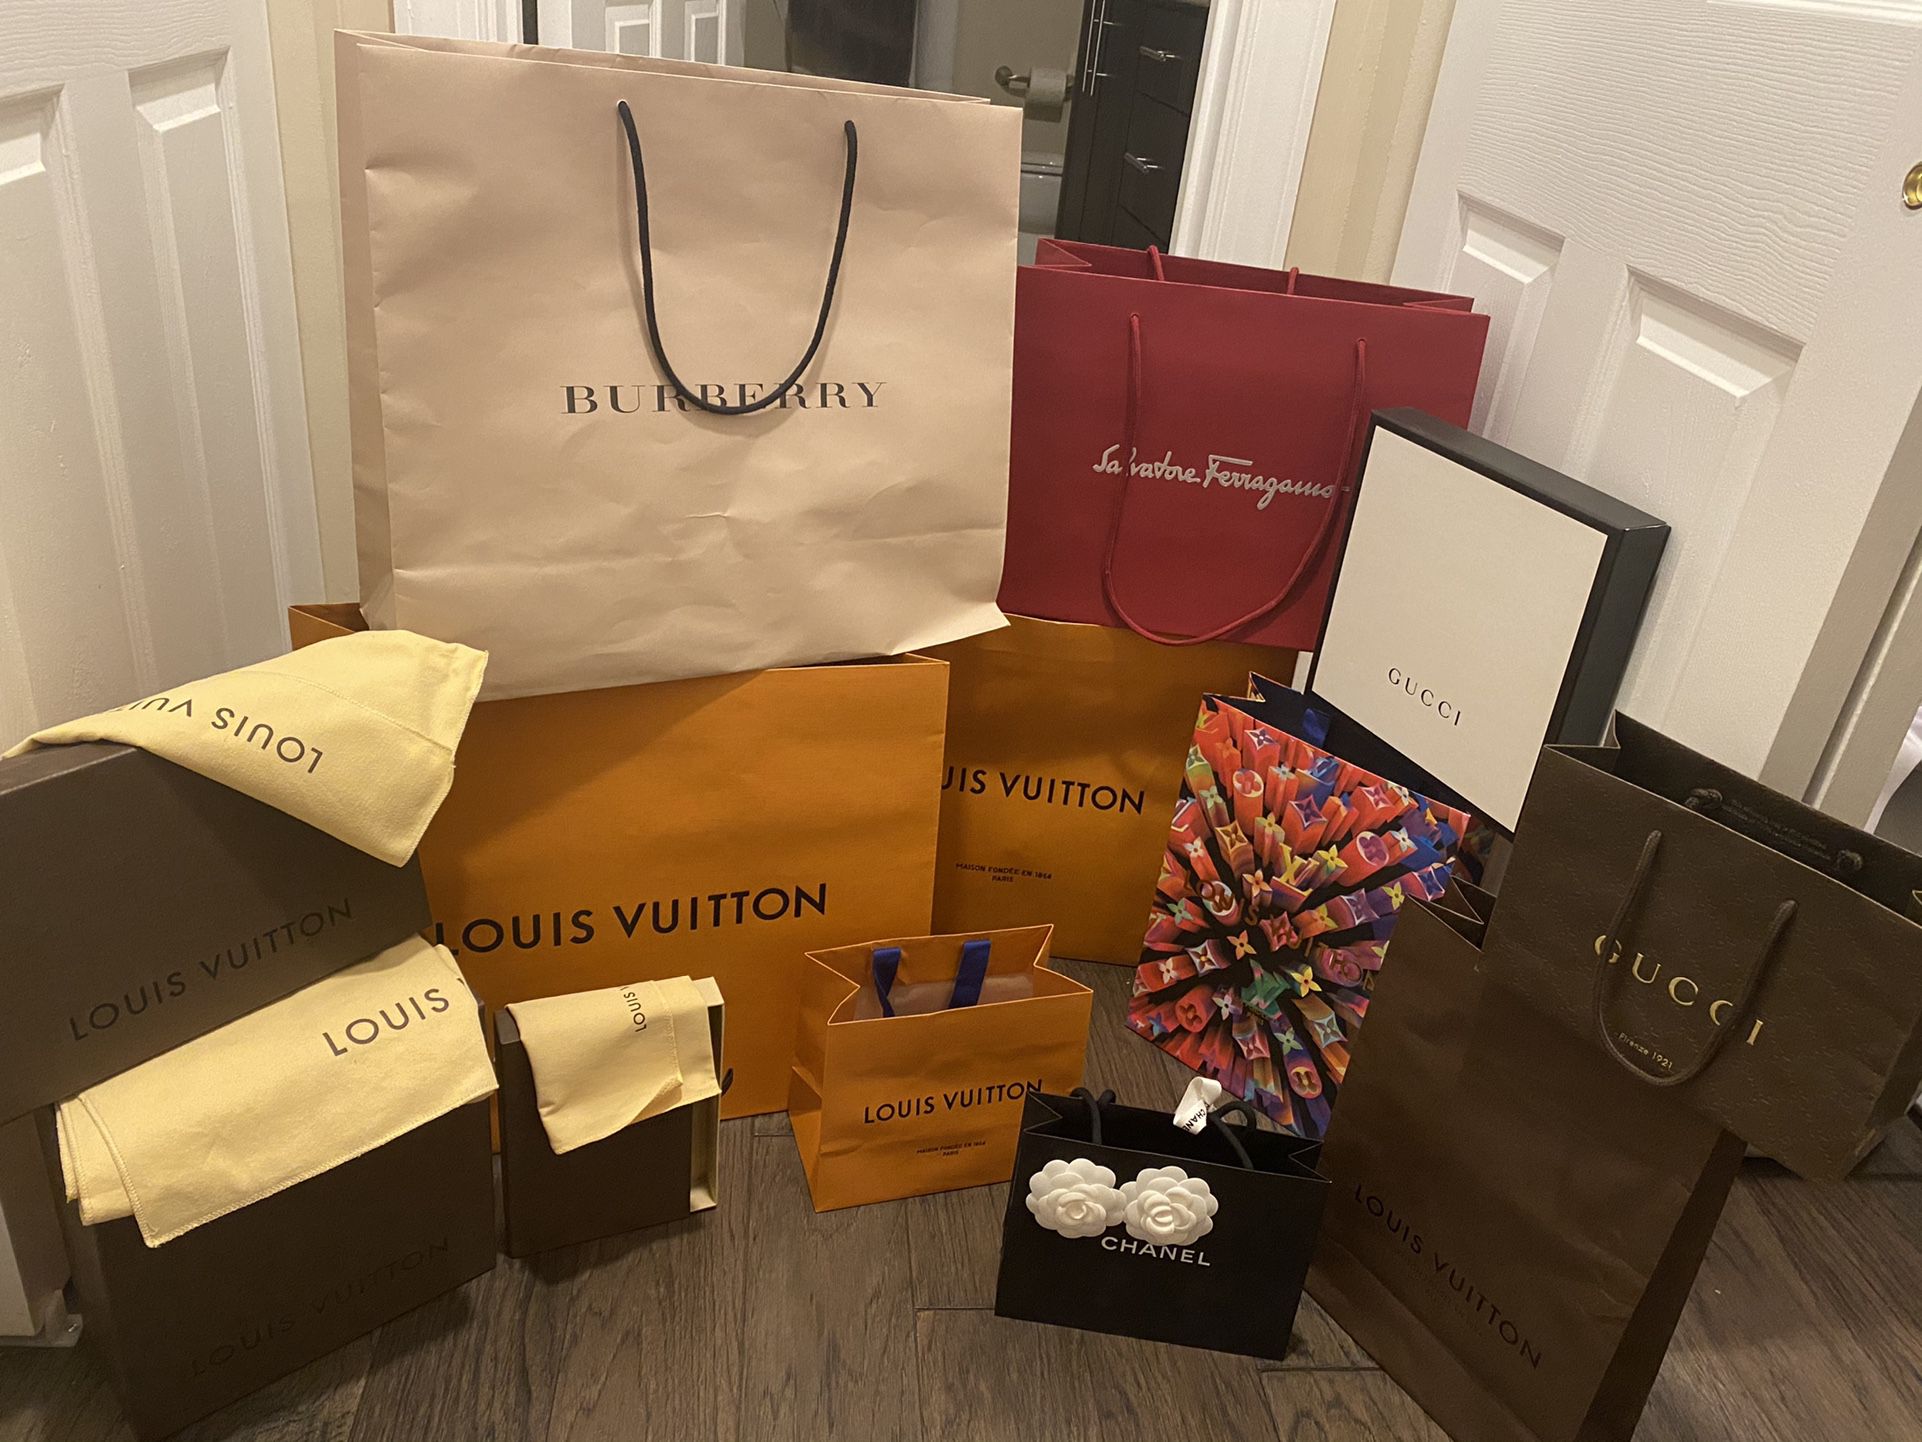 Louis Vuitton, Burberry, Chanel, Gucci, Ferragamo Shopping Bags , Dust Bags, Boxes (prices In Post)